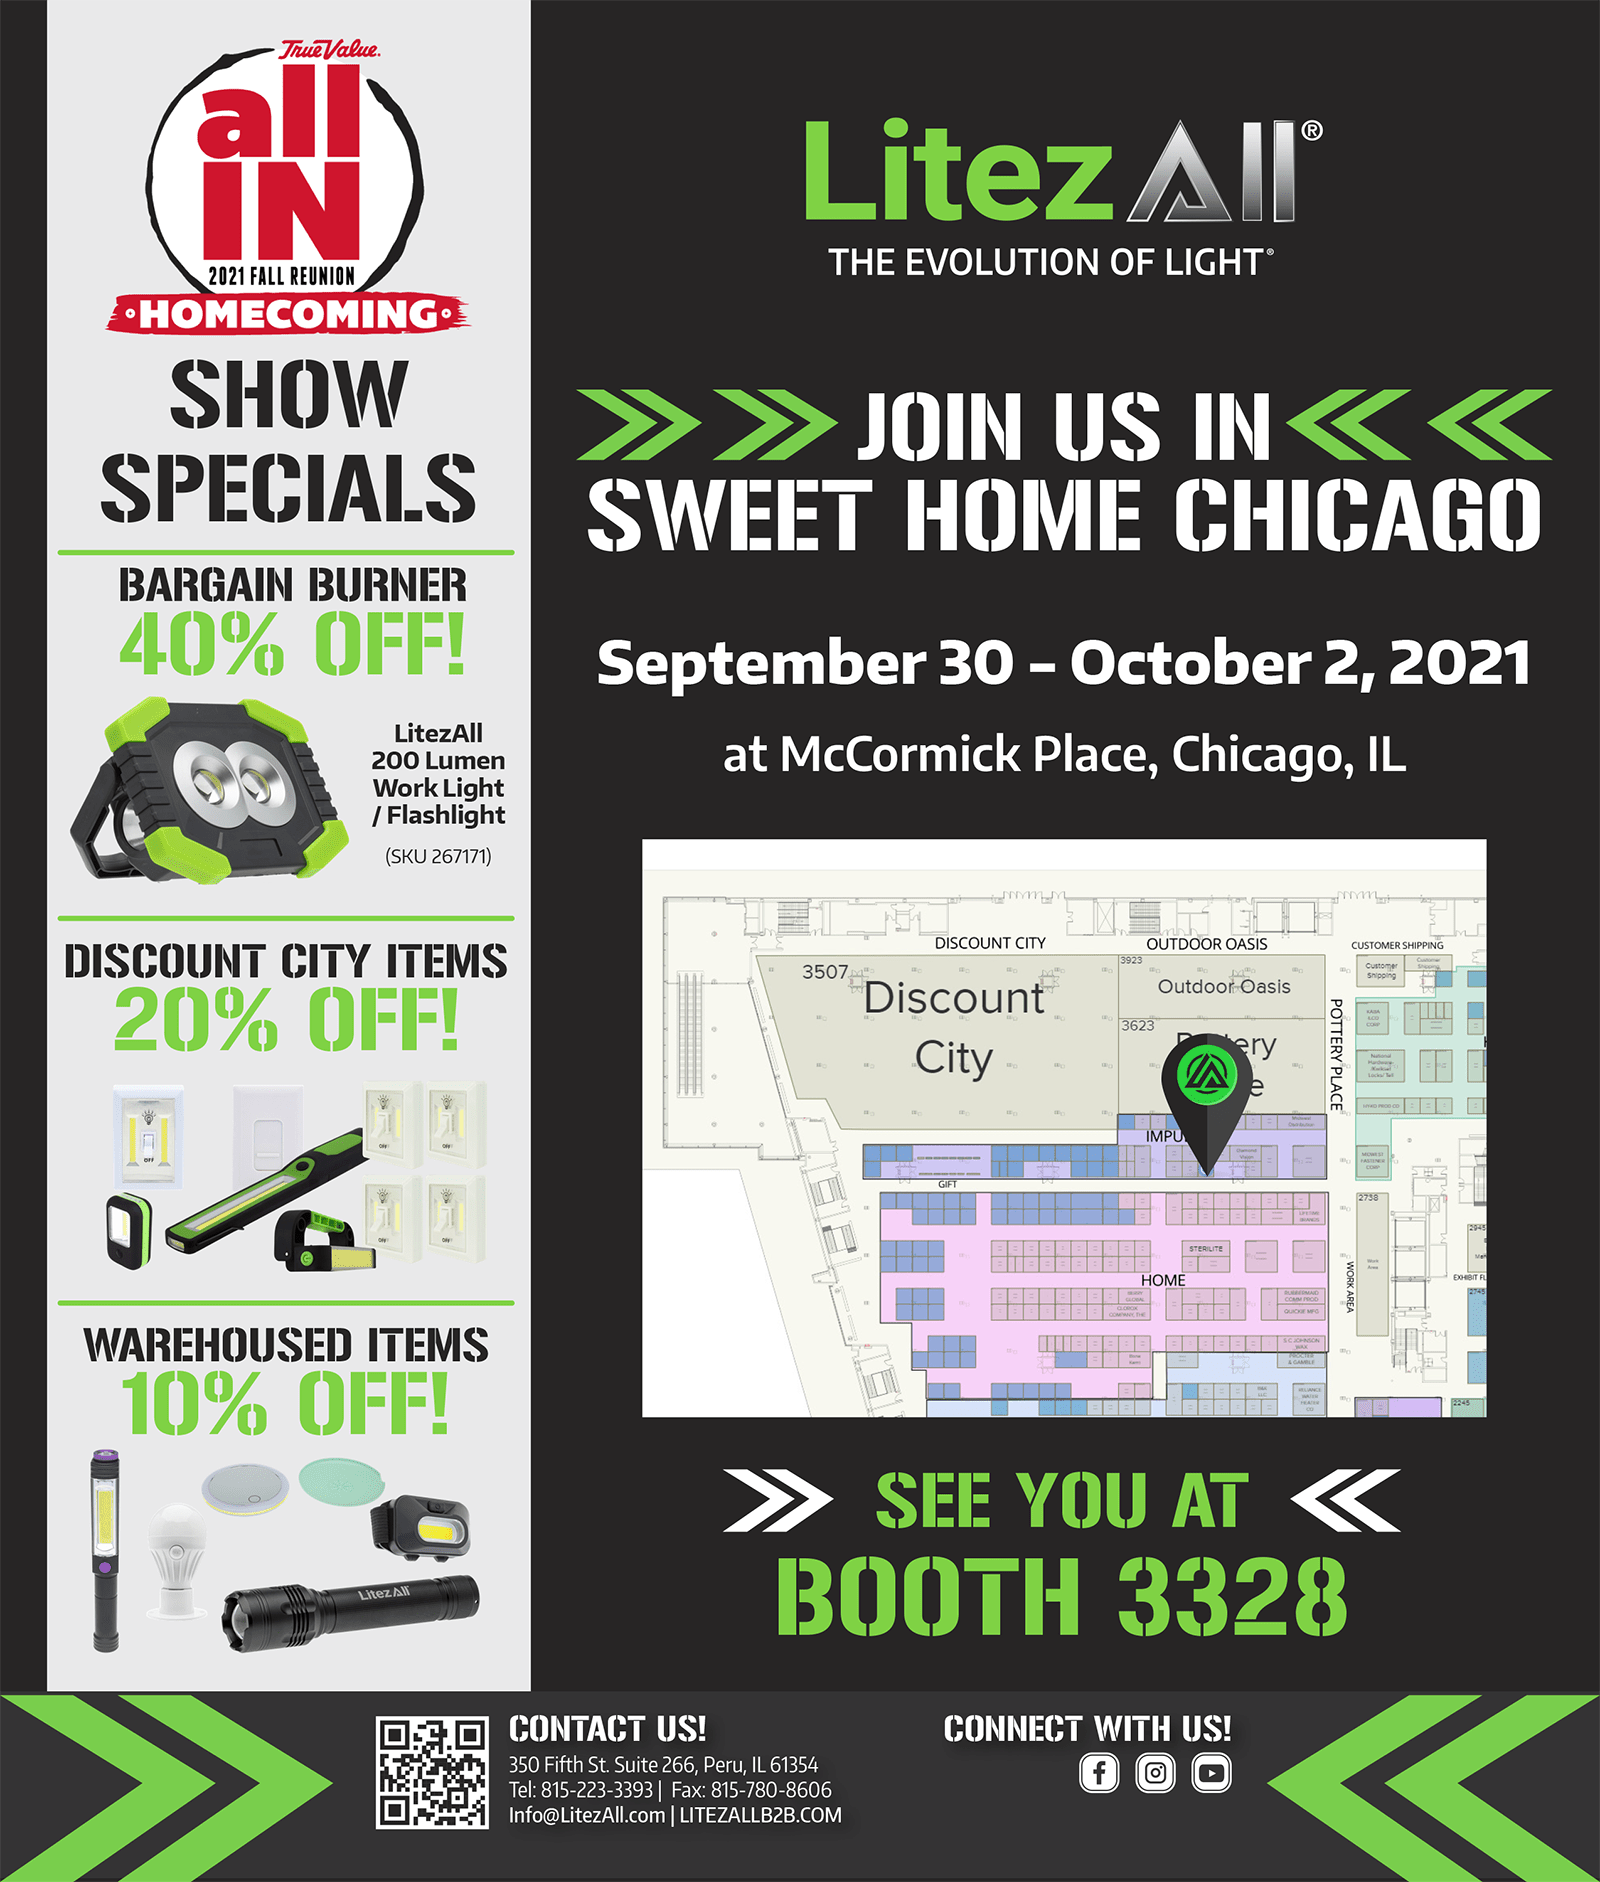 Visit Our Booth at the True Value Show Booth 3328 - LitezAll